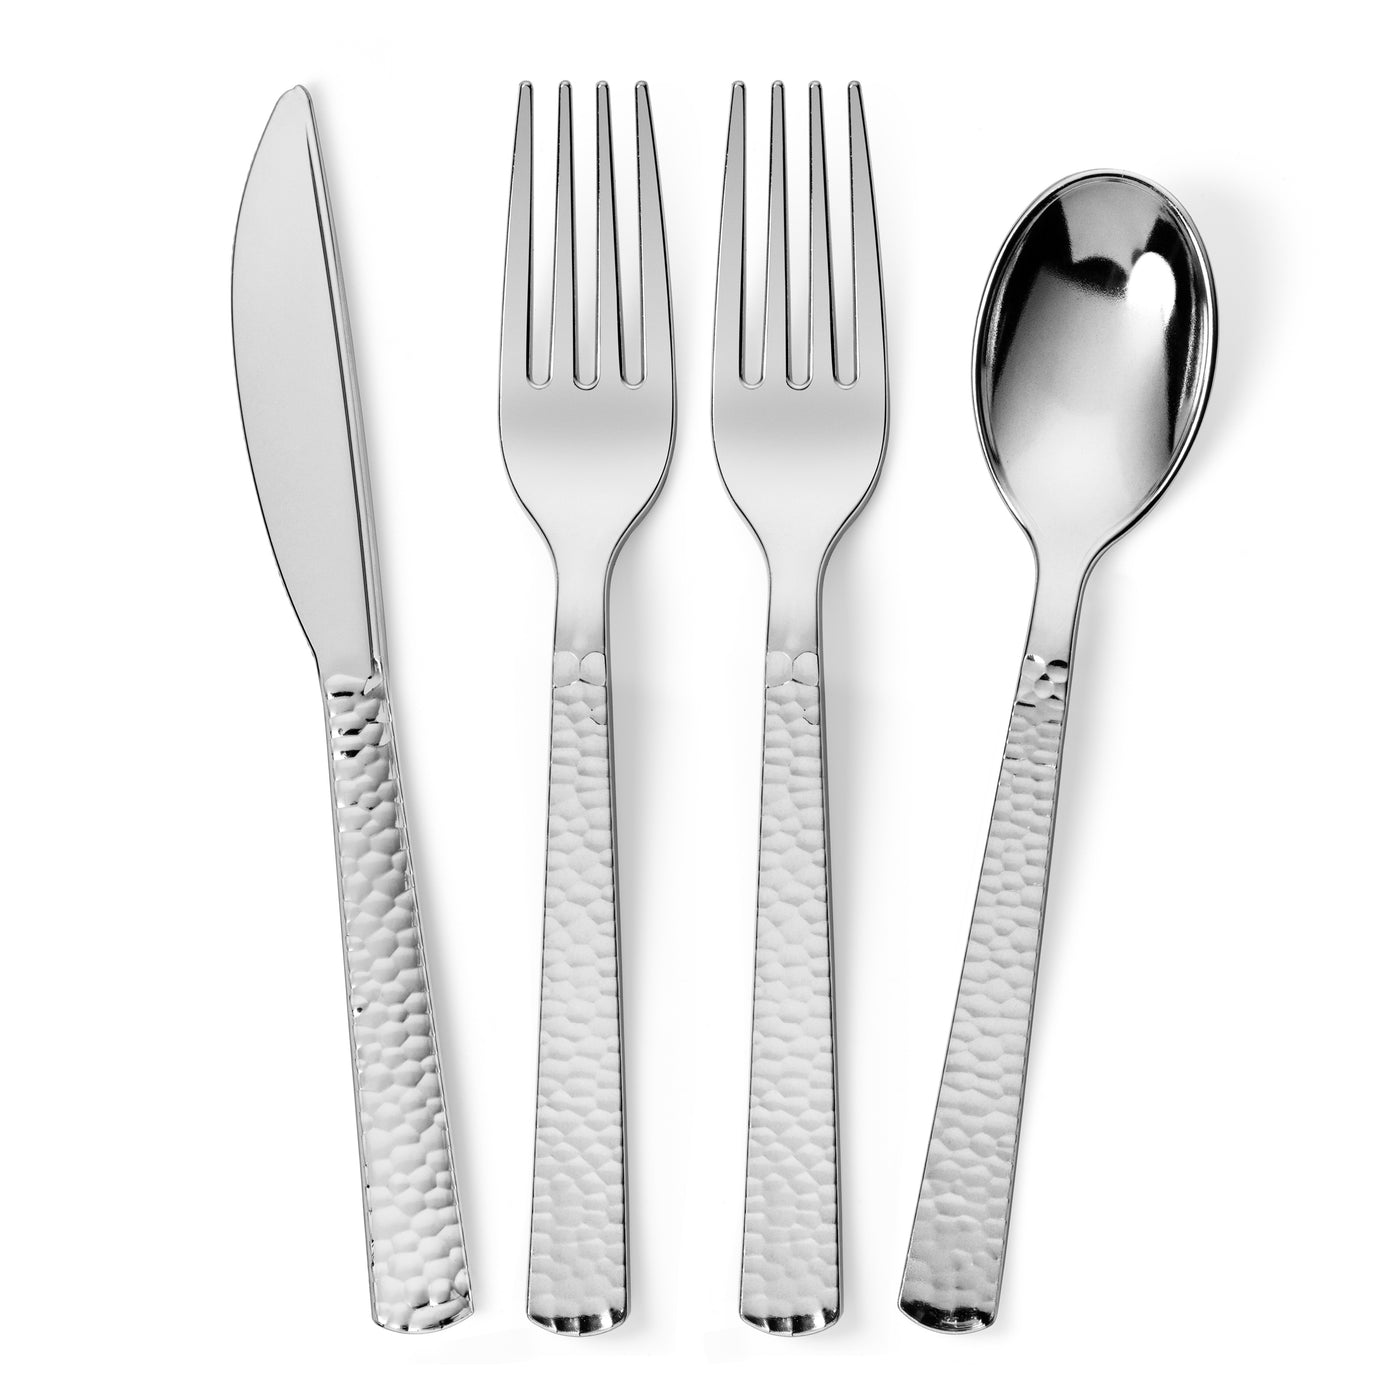 300 Pieces Silver Plastic Cutlery Set - Silver Metallic Plastic Silverware - Hammered Finish - 75 Spoons, 75 Knives, 150 Forks